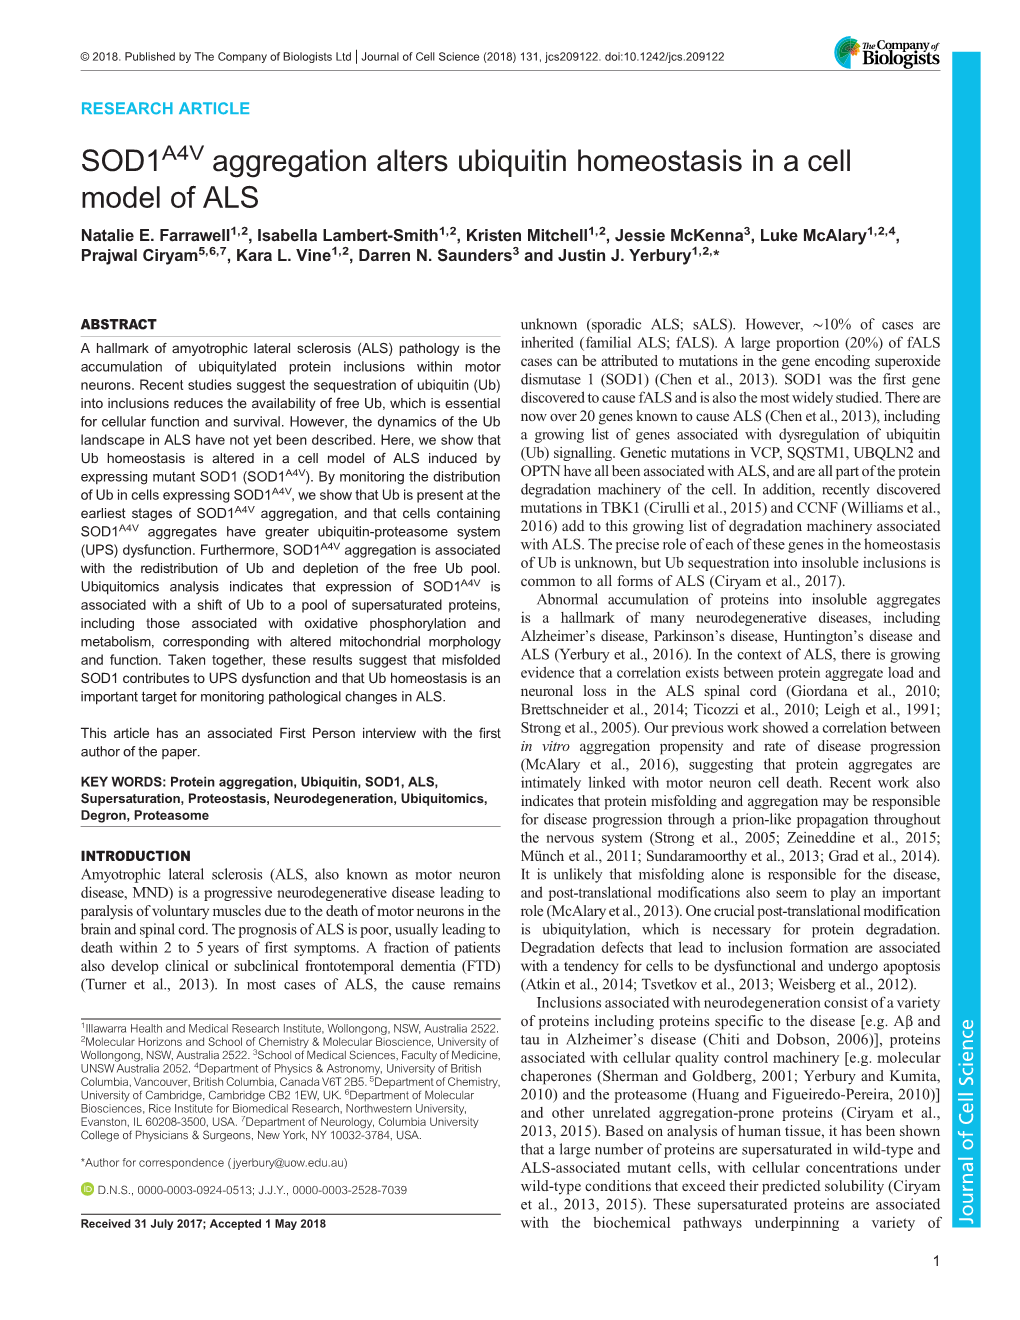 SOD1A4V Aggregation Alters Ubiquitin Homeostasis in a Cell Model of ALS Natalie E